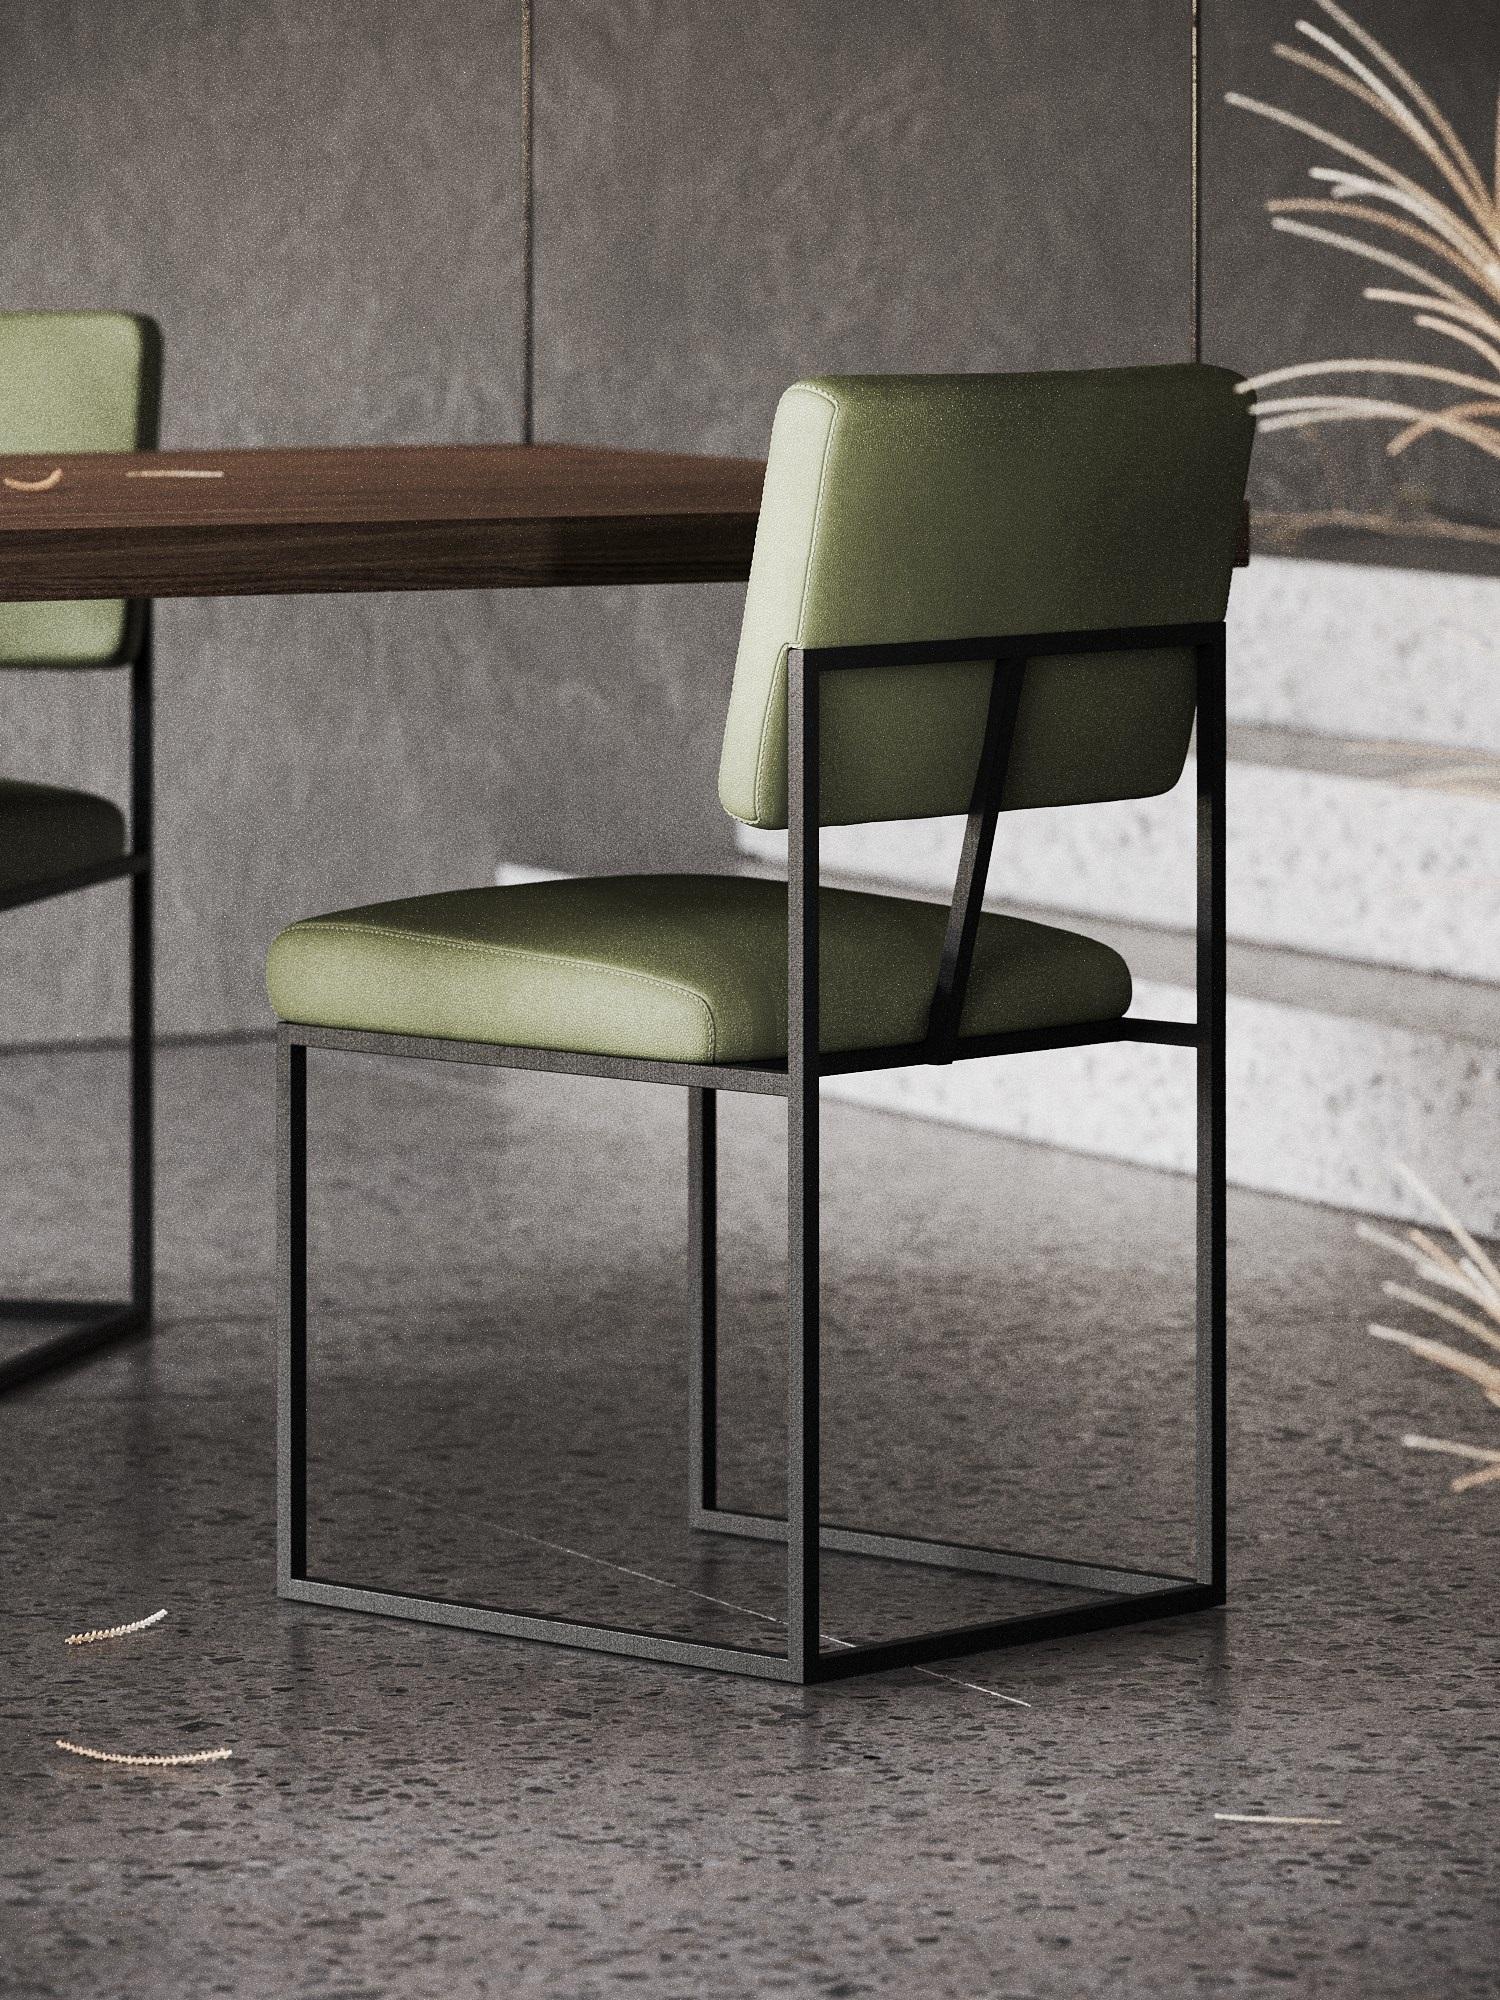 Modern Contemporary Dining Chair Inspired by Minimalist Design For Sale